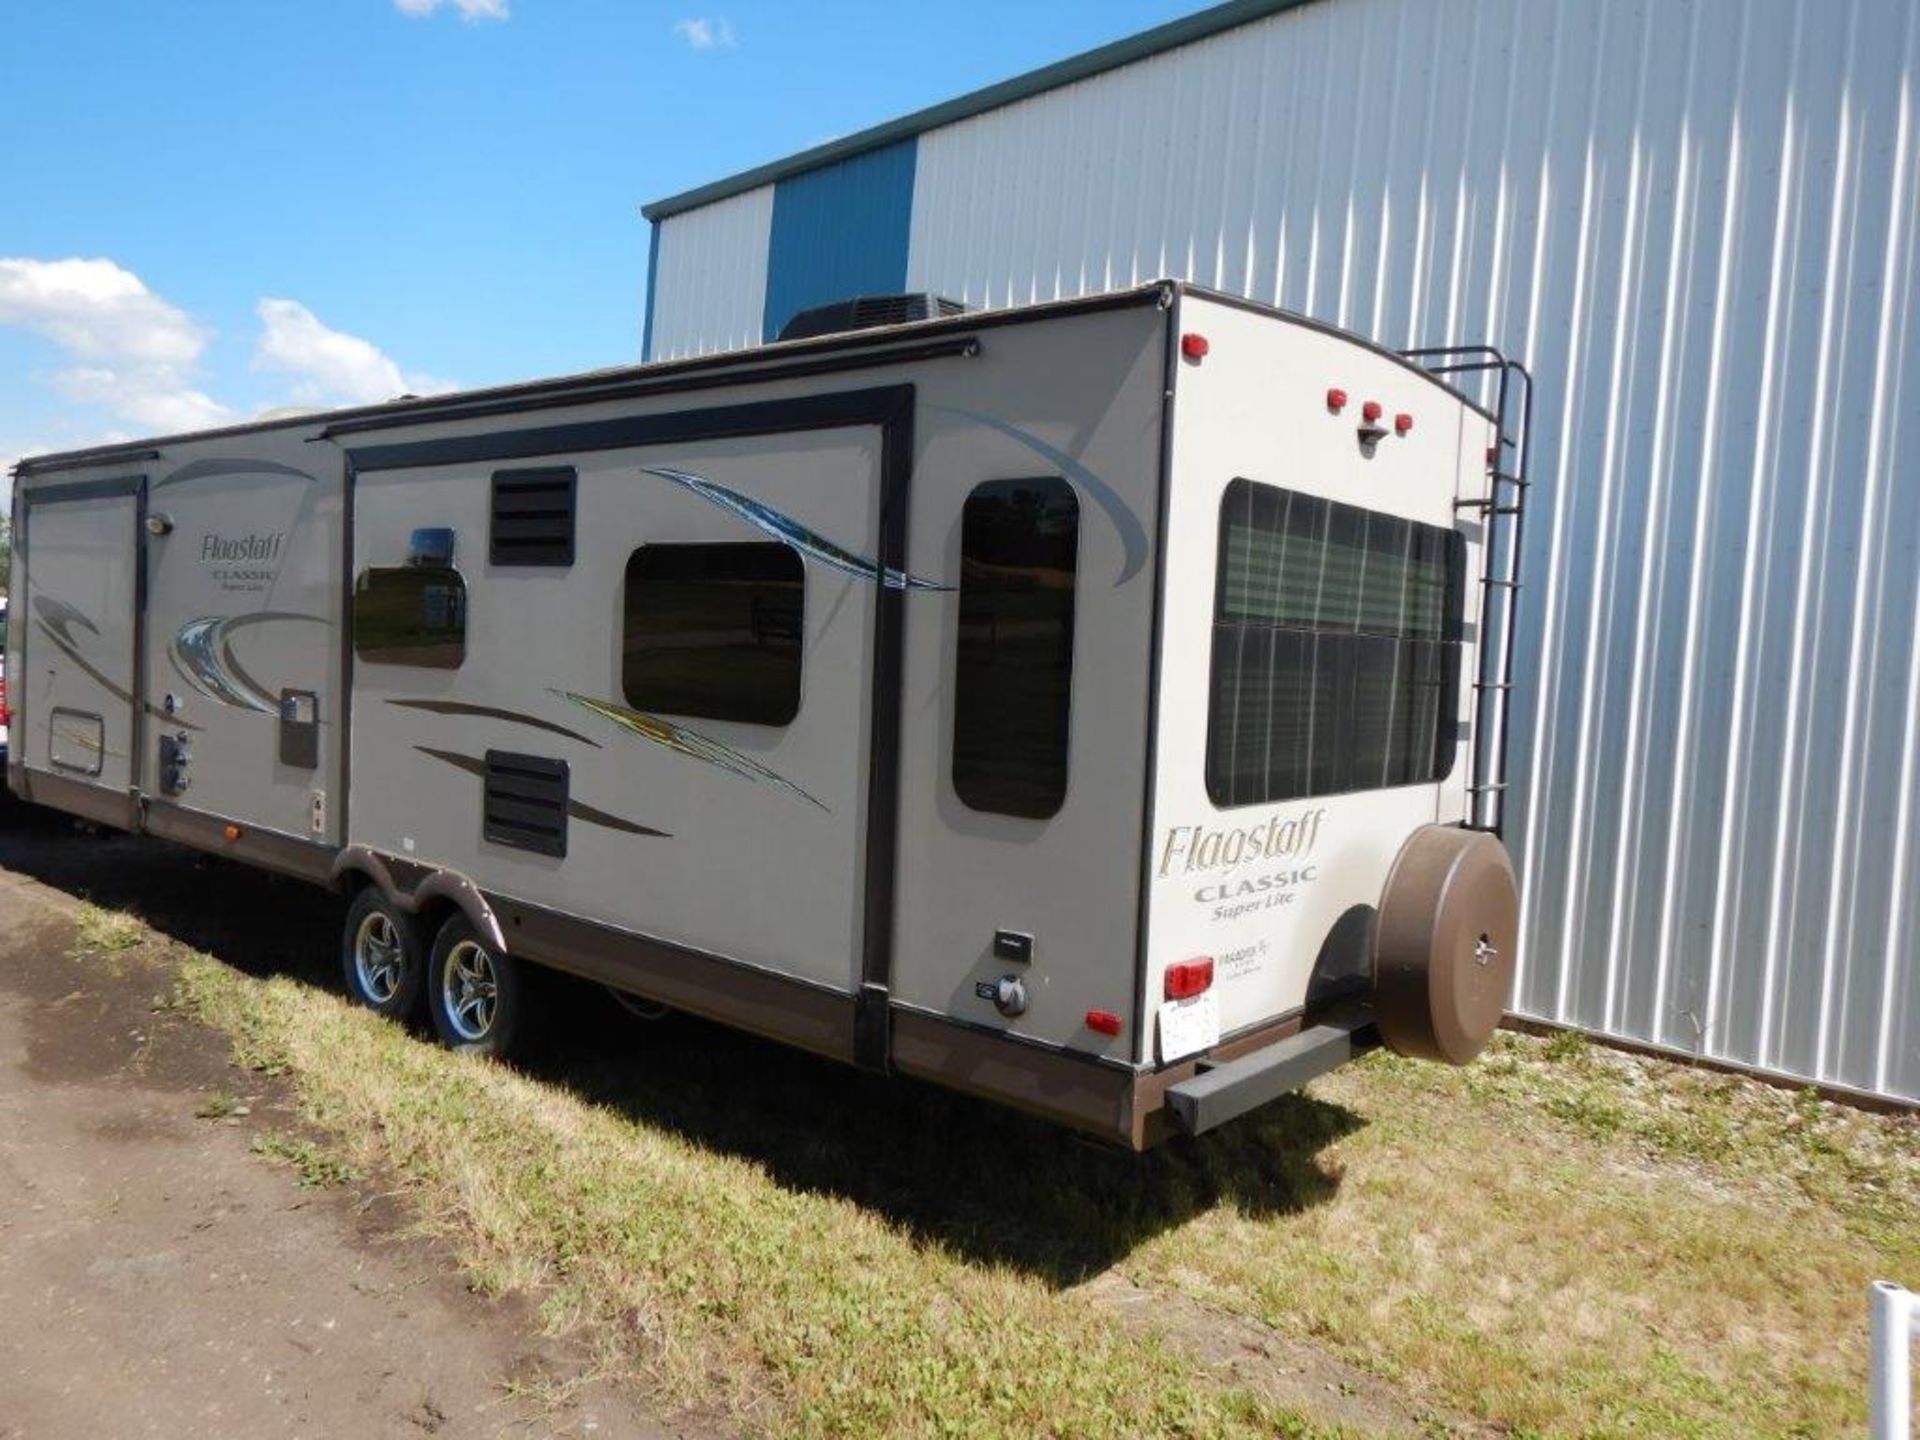 2015 FLAGSTAFF CLASSIC SUPER LITE 32FT TRAVEL TRAILER, 3 SLIDES, GREAT CONDITION BELOW 800 ROAD KMS! - Image 7 of 37